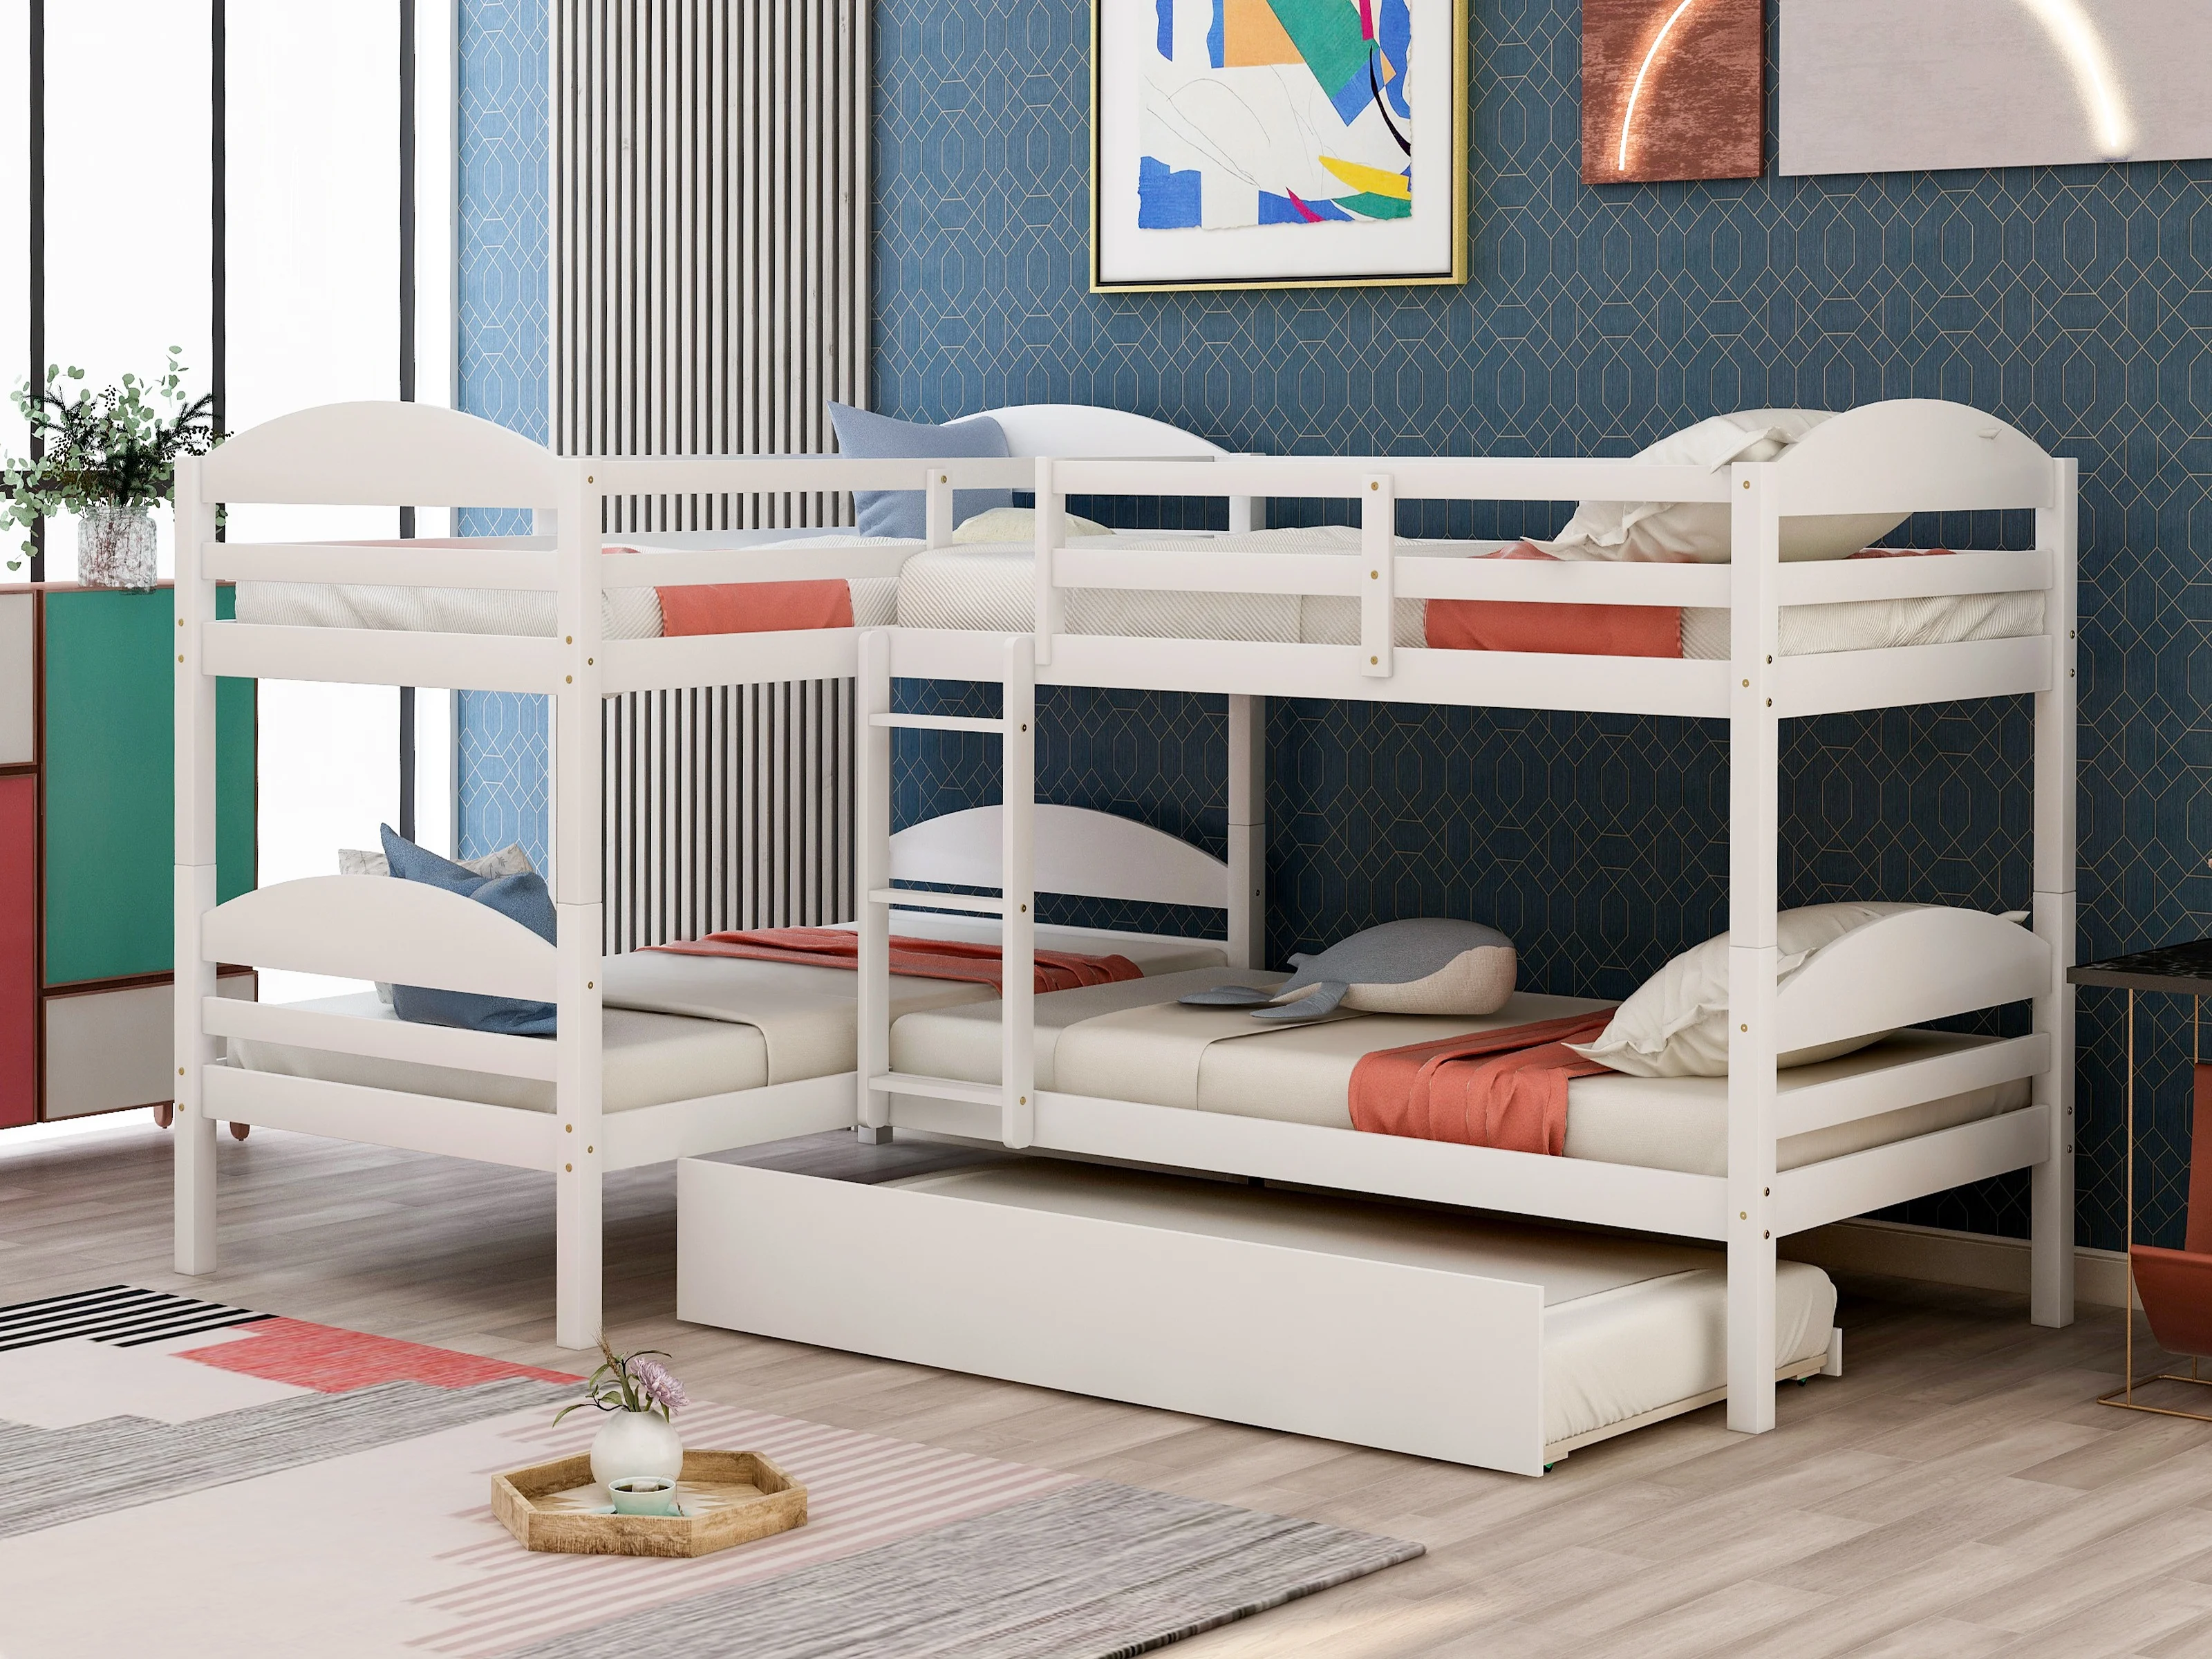 

119"L x 80"W Home Modern And Minimalist Wooden Bedroom Furniture Beds Frames Bases Twin L- Shaped Bunk Bed With Trundle White